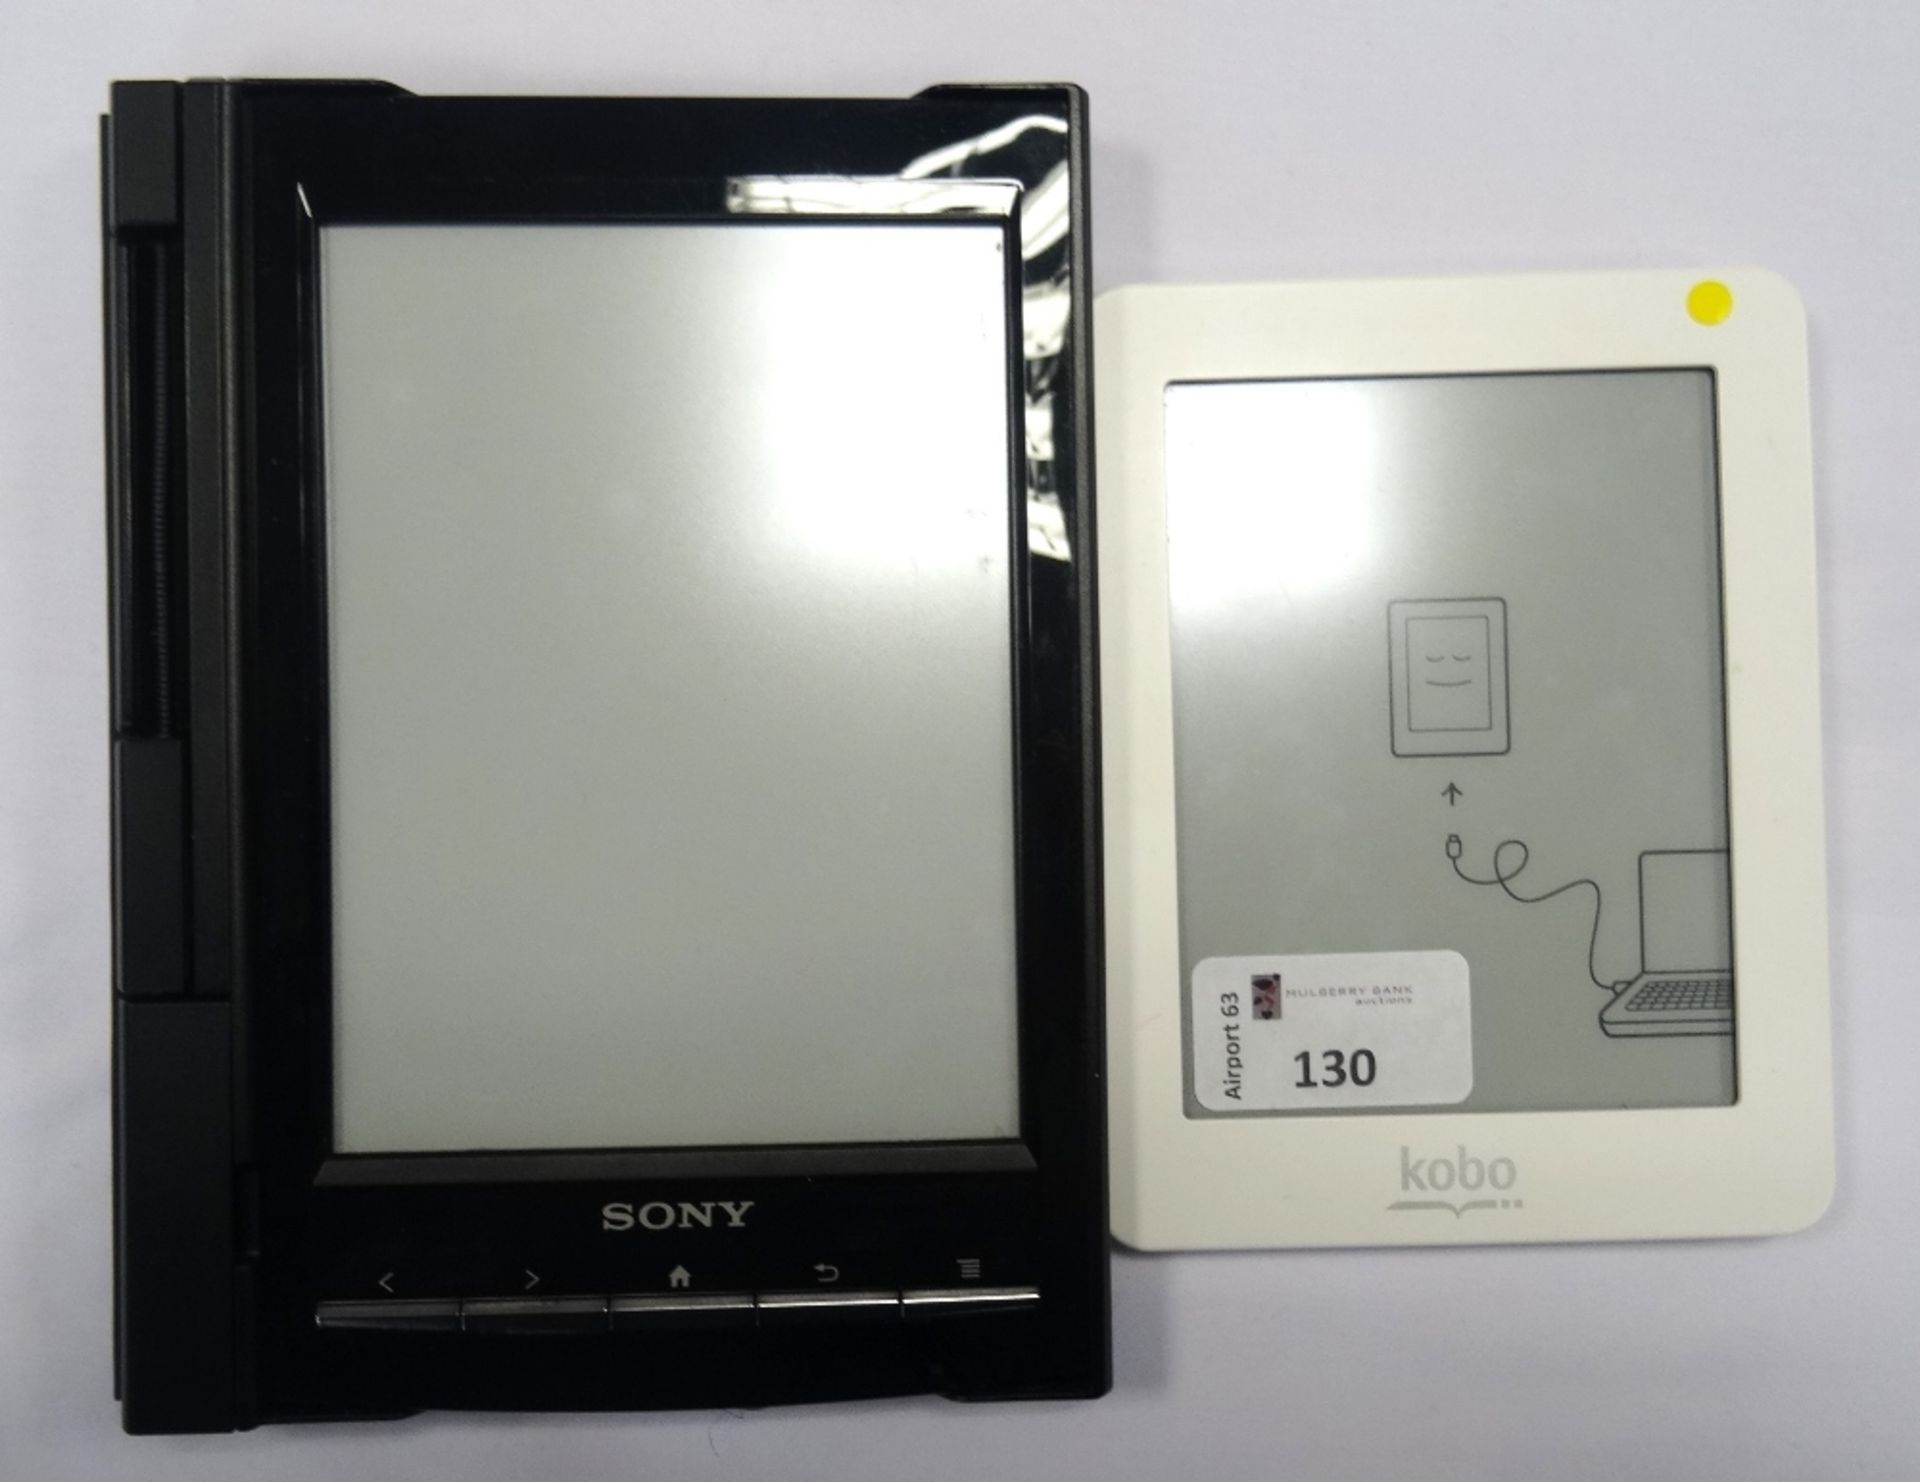 TWO E-READER DEVICES